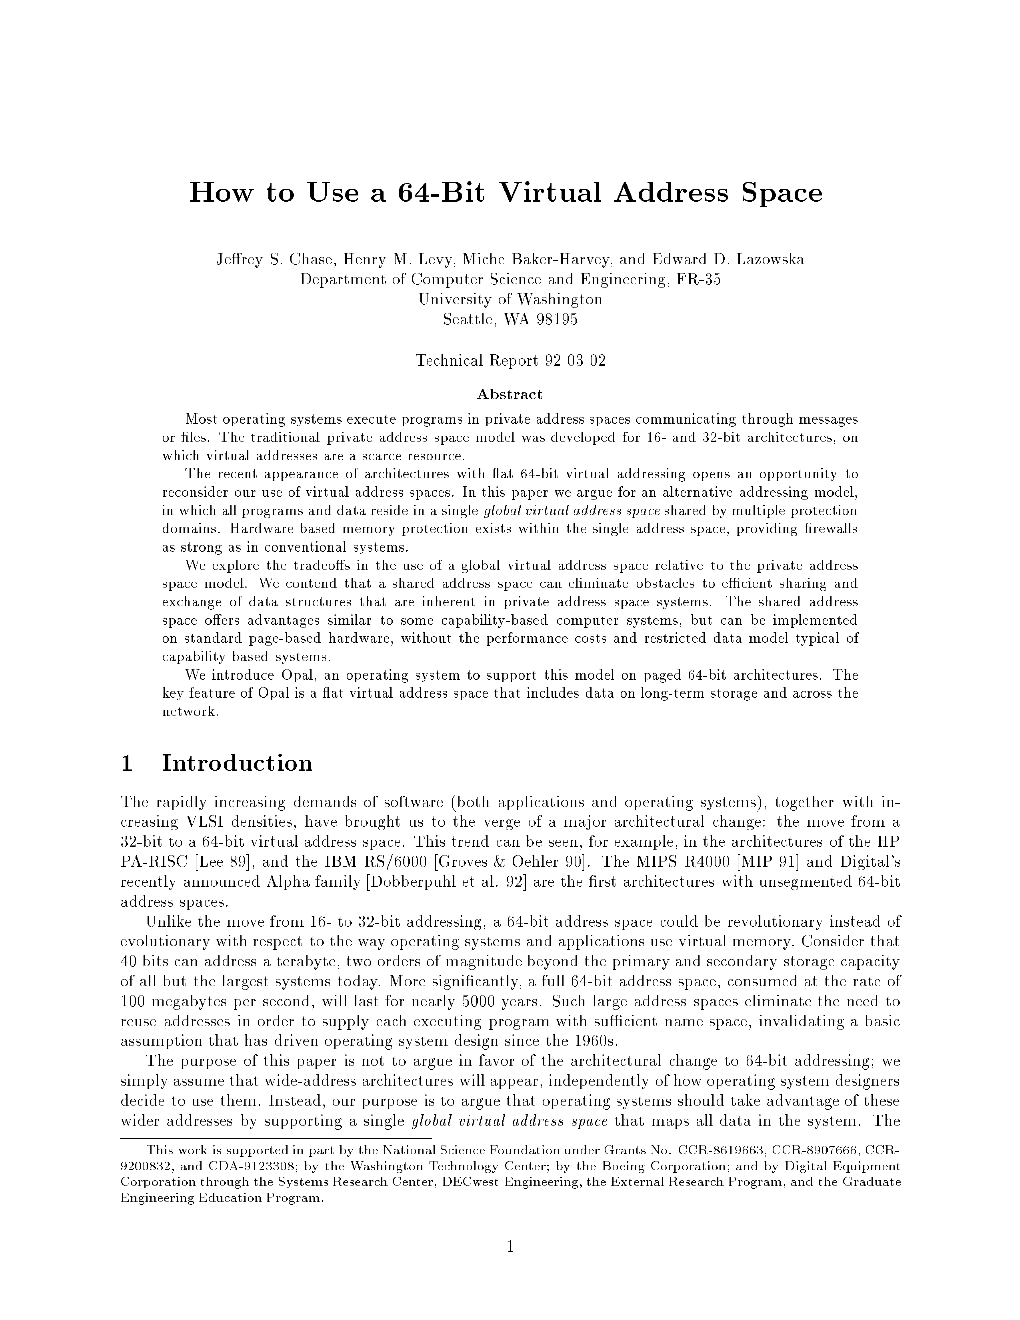 How to Use a 64-Bit Virtual Address Space